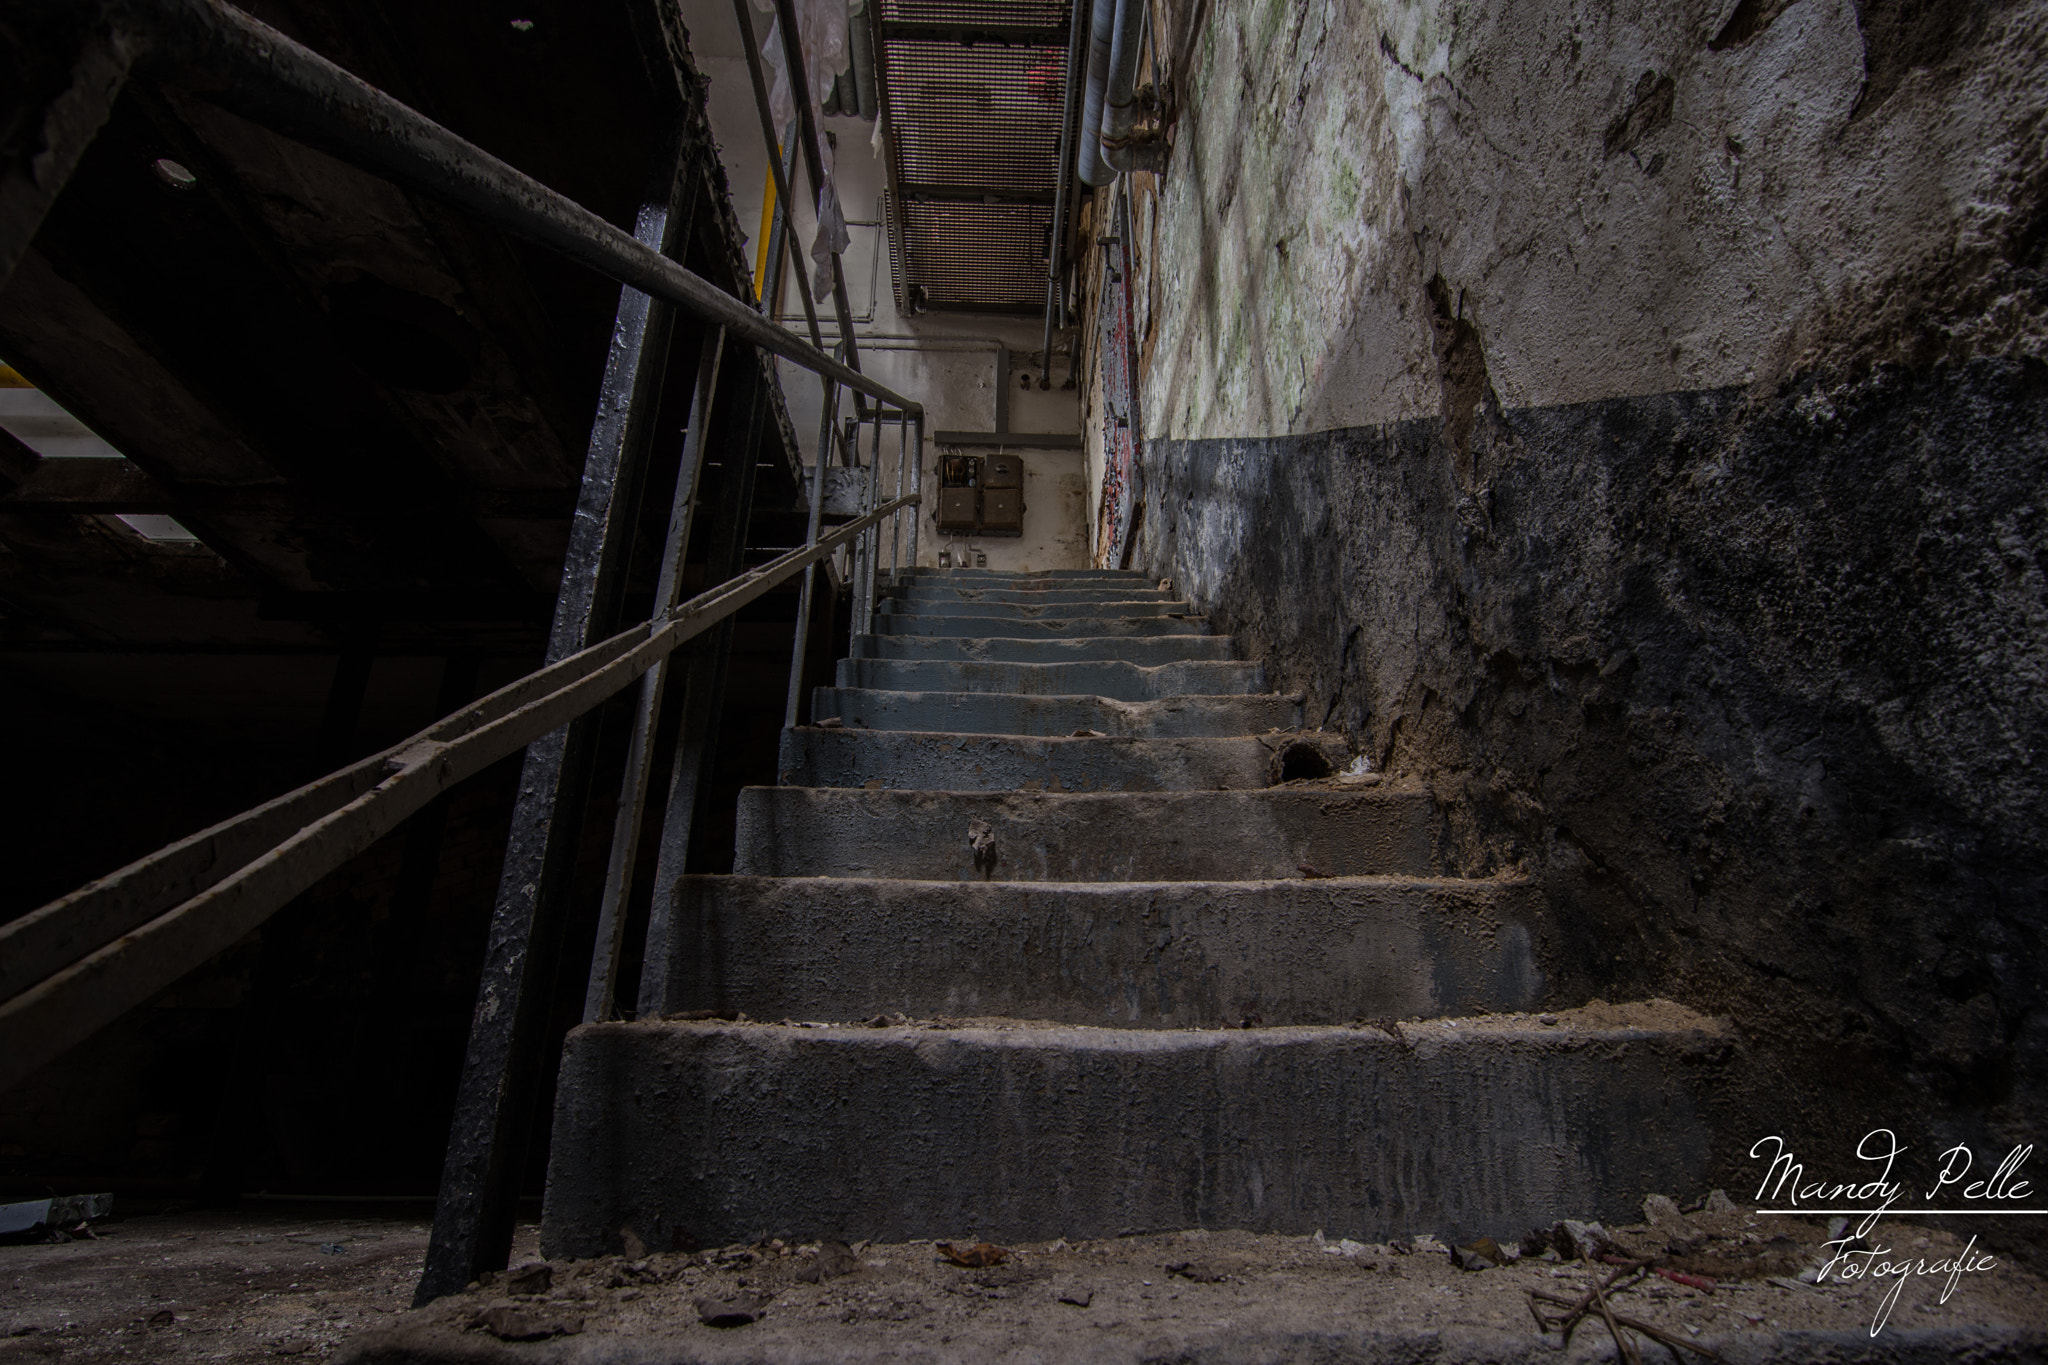 Nikon D7200 sample photo. The stairs lead to nowhere... photography